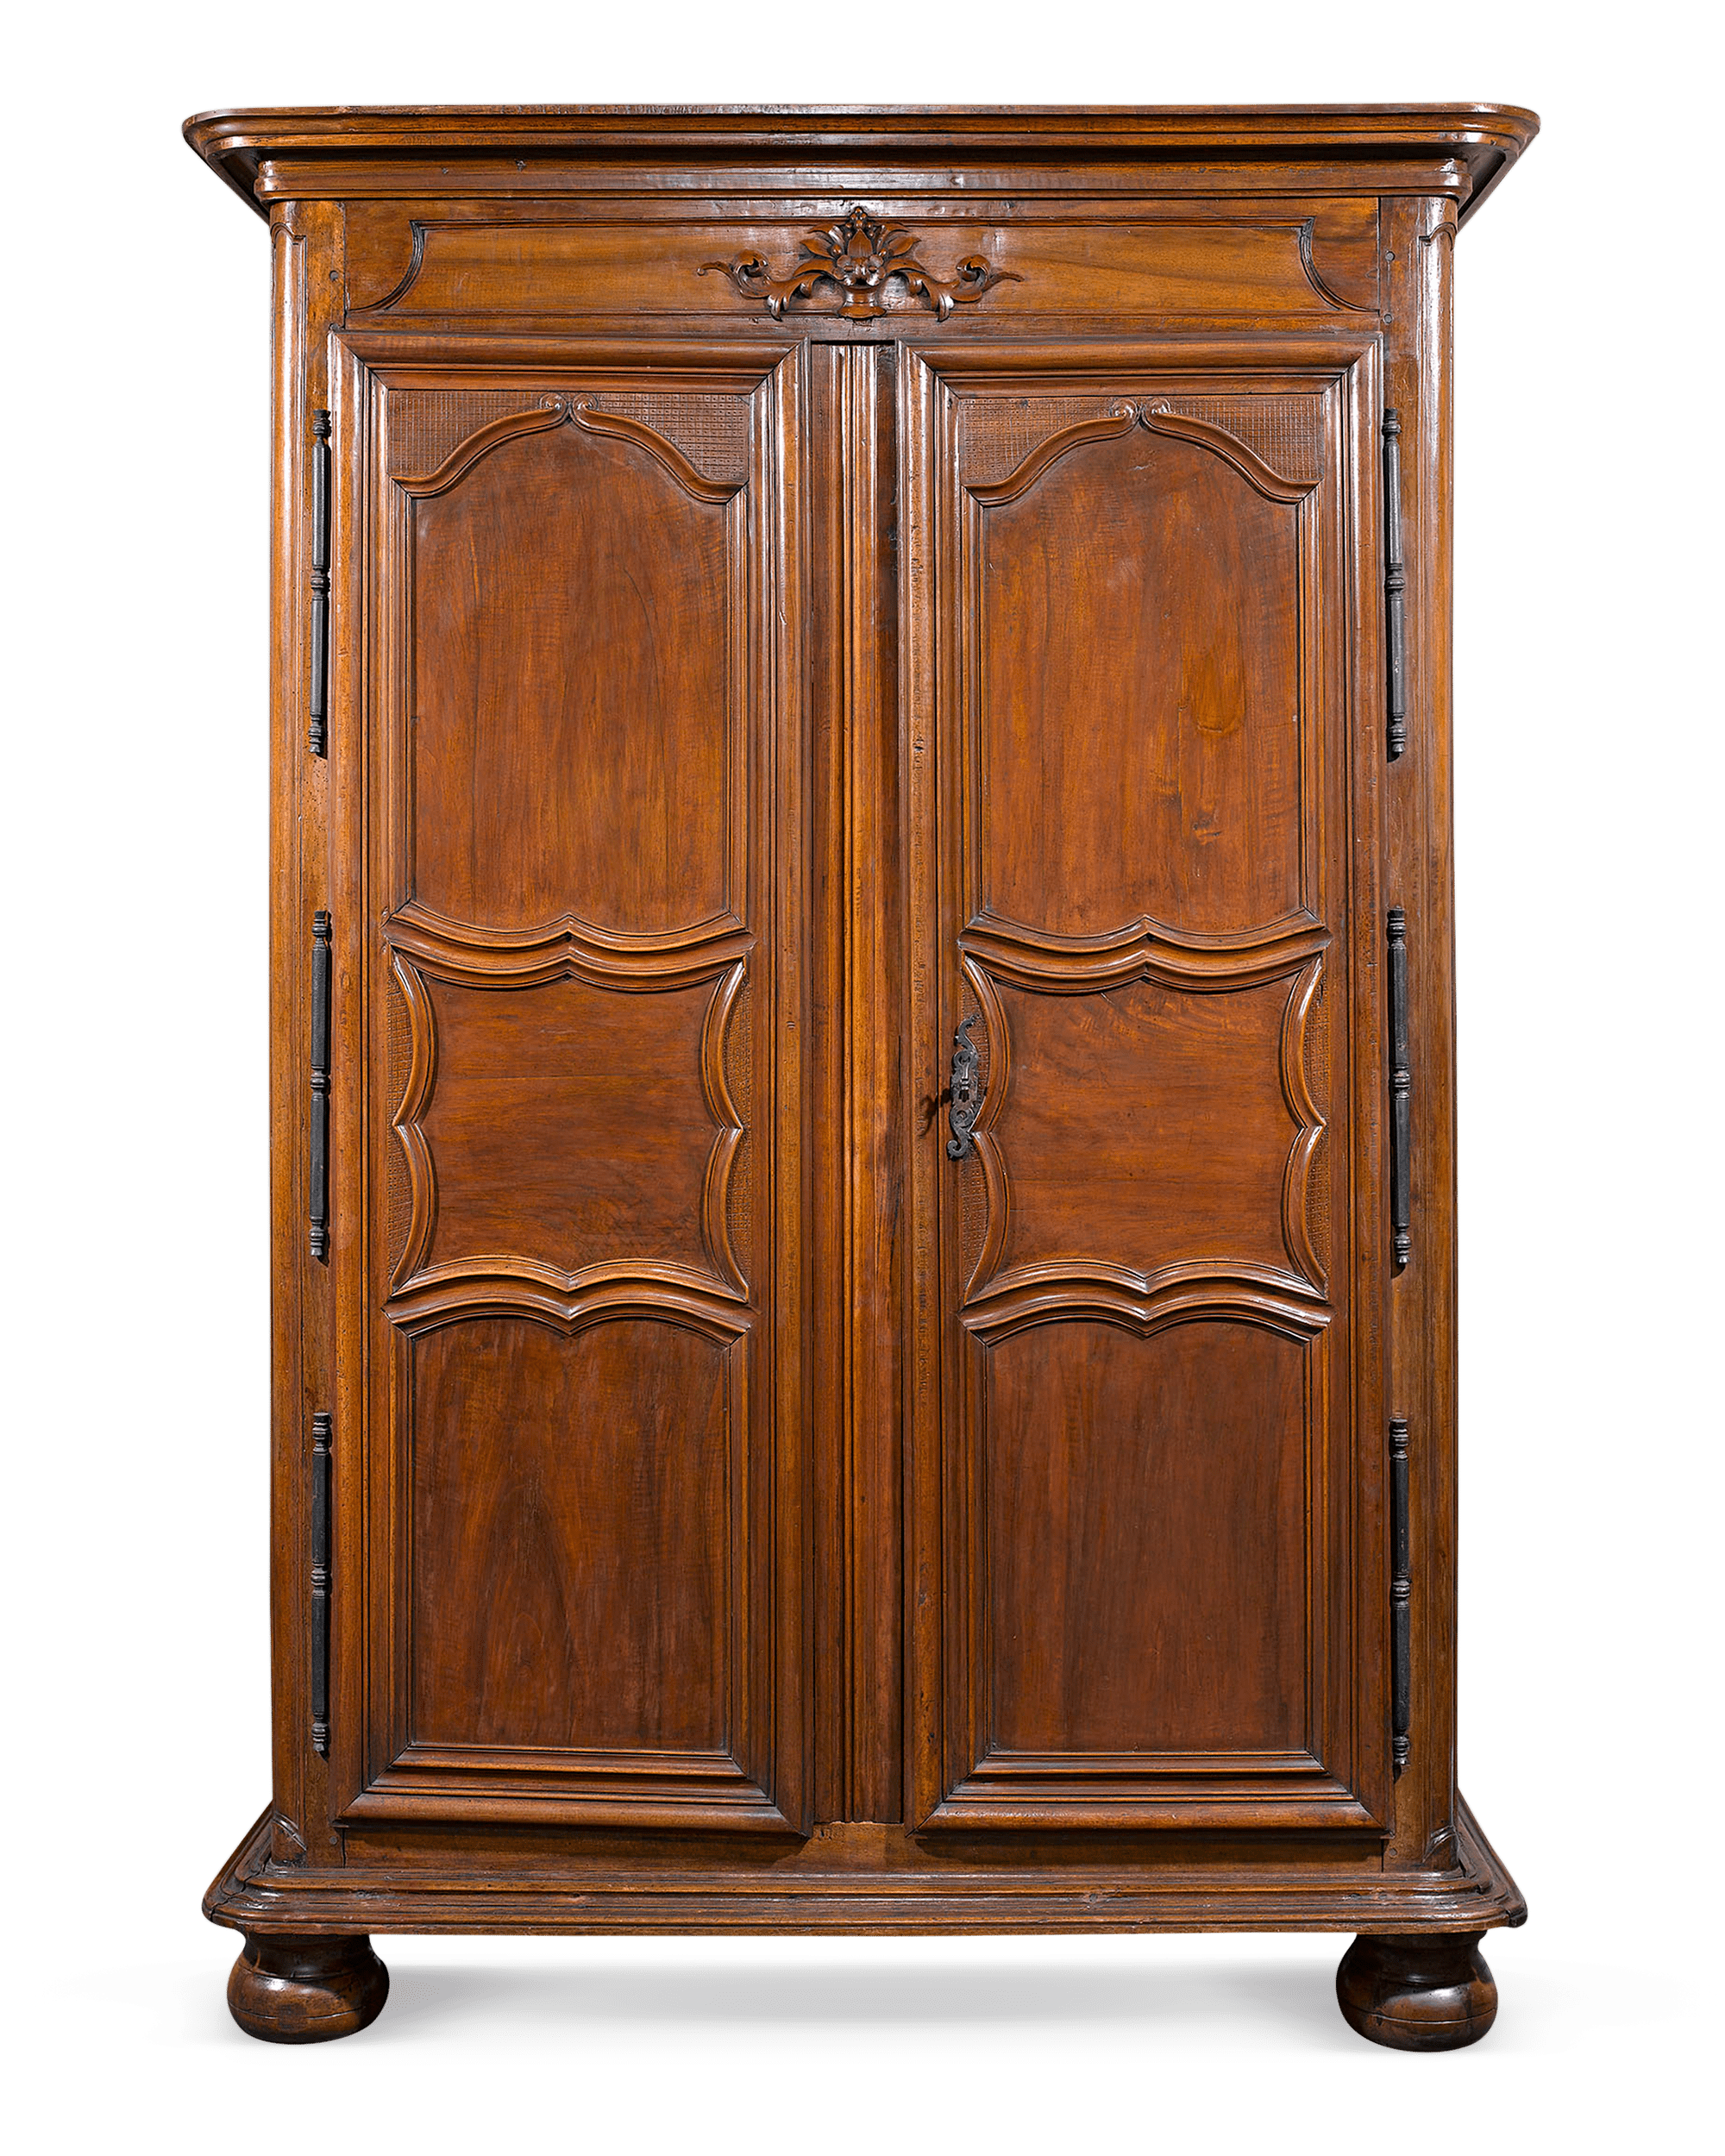 This elegant French armoire exemplifies the beauty of Provincial furnishings